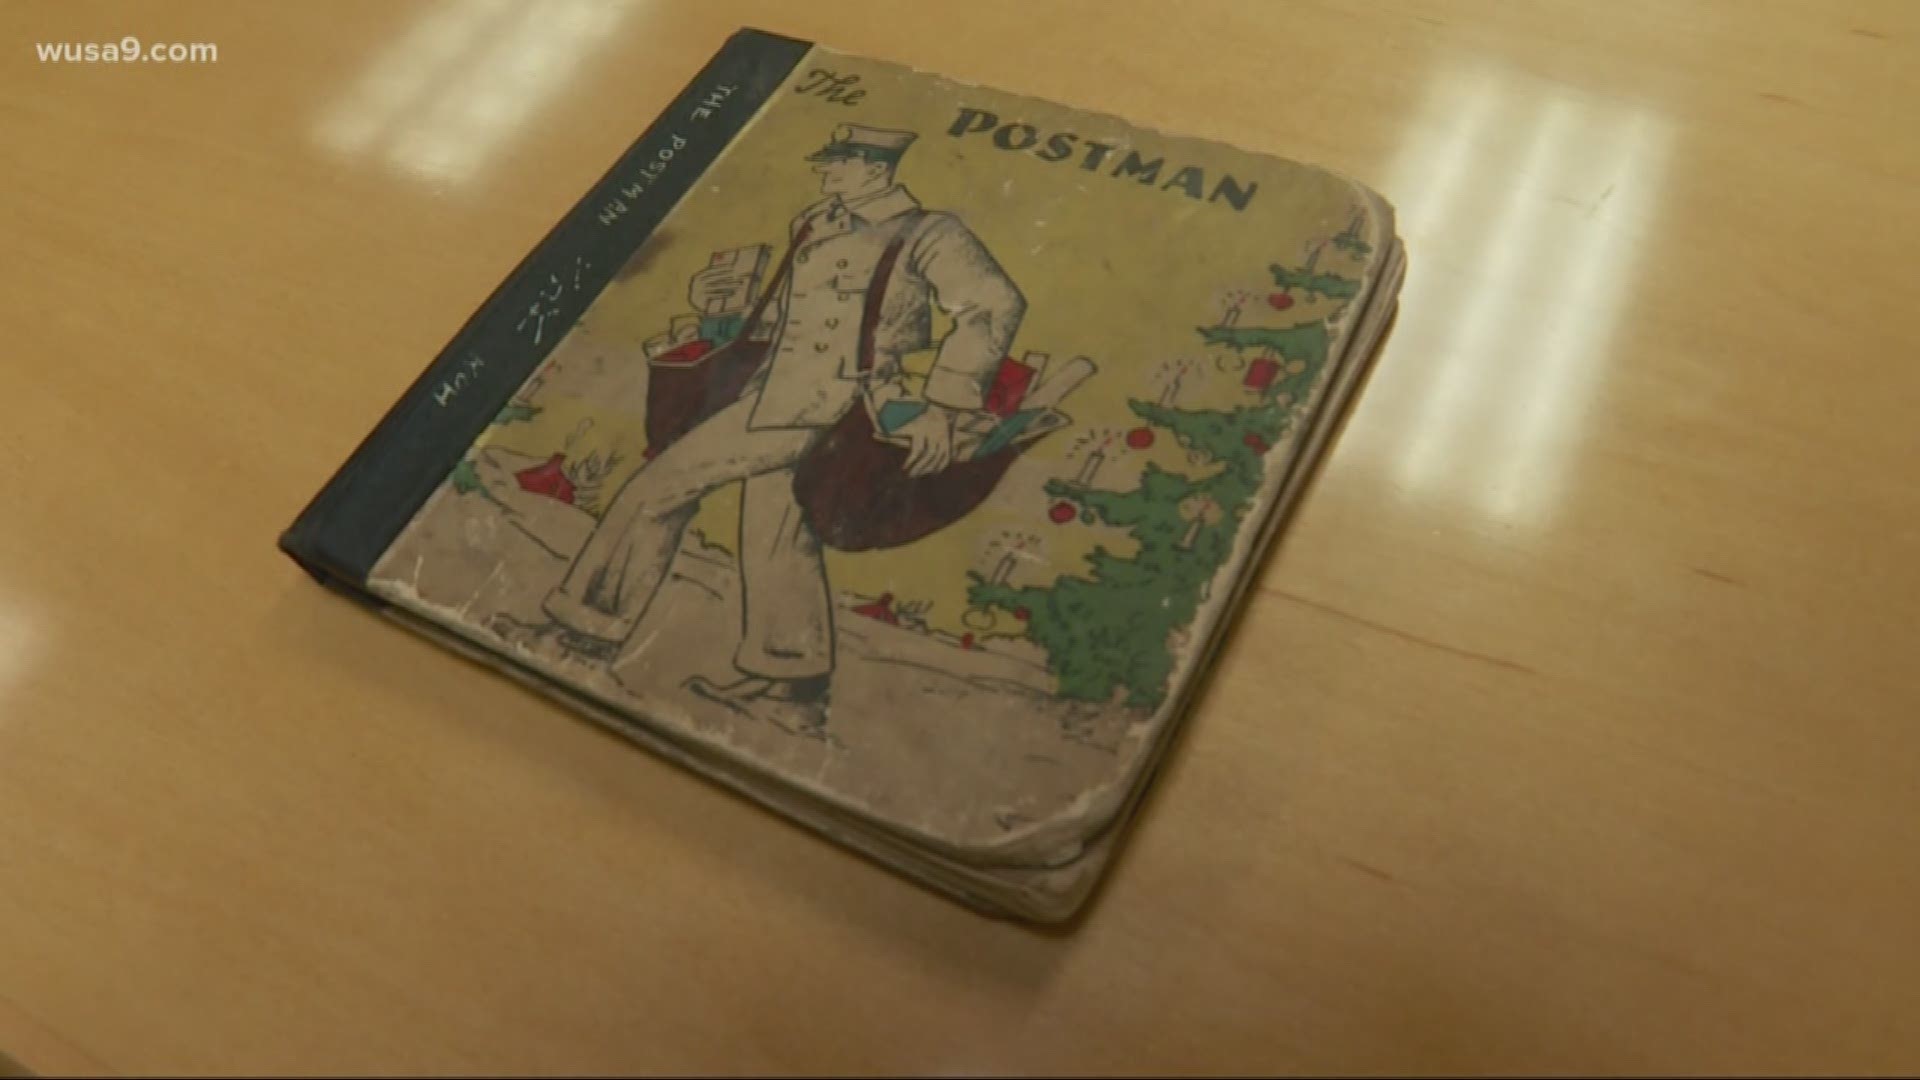 The book, named 'The Postman' was published in 1929.